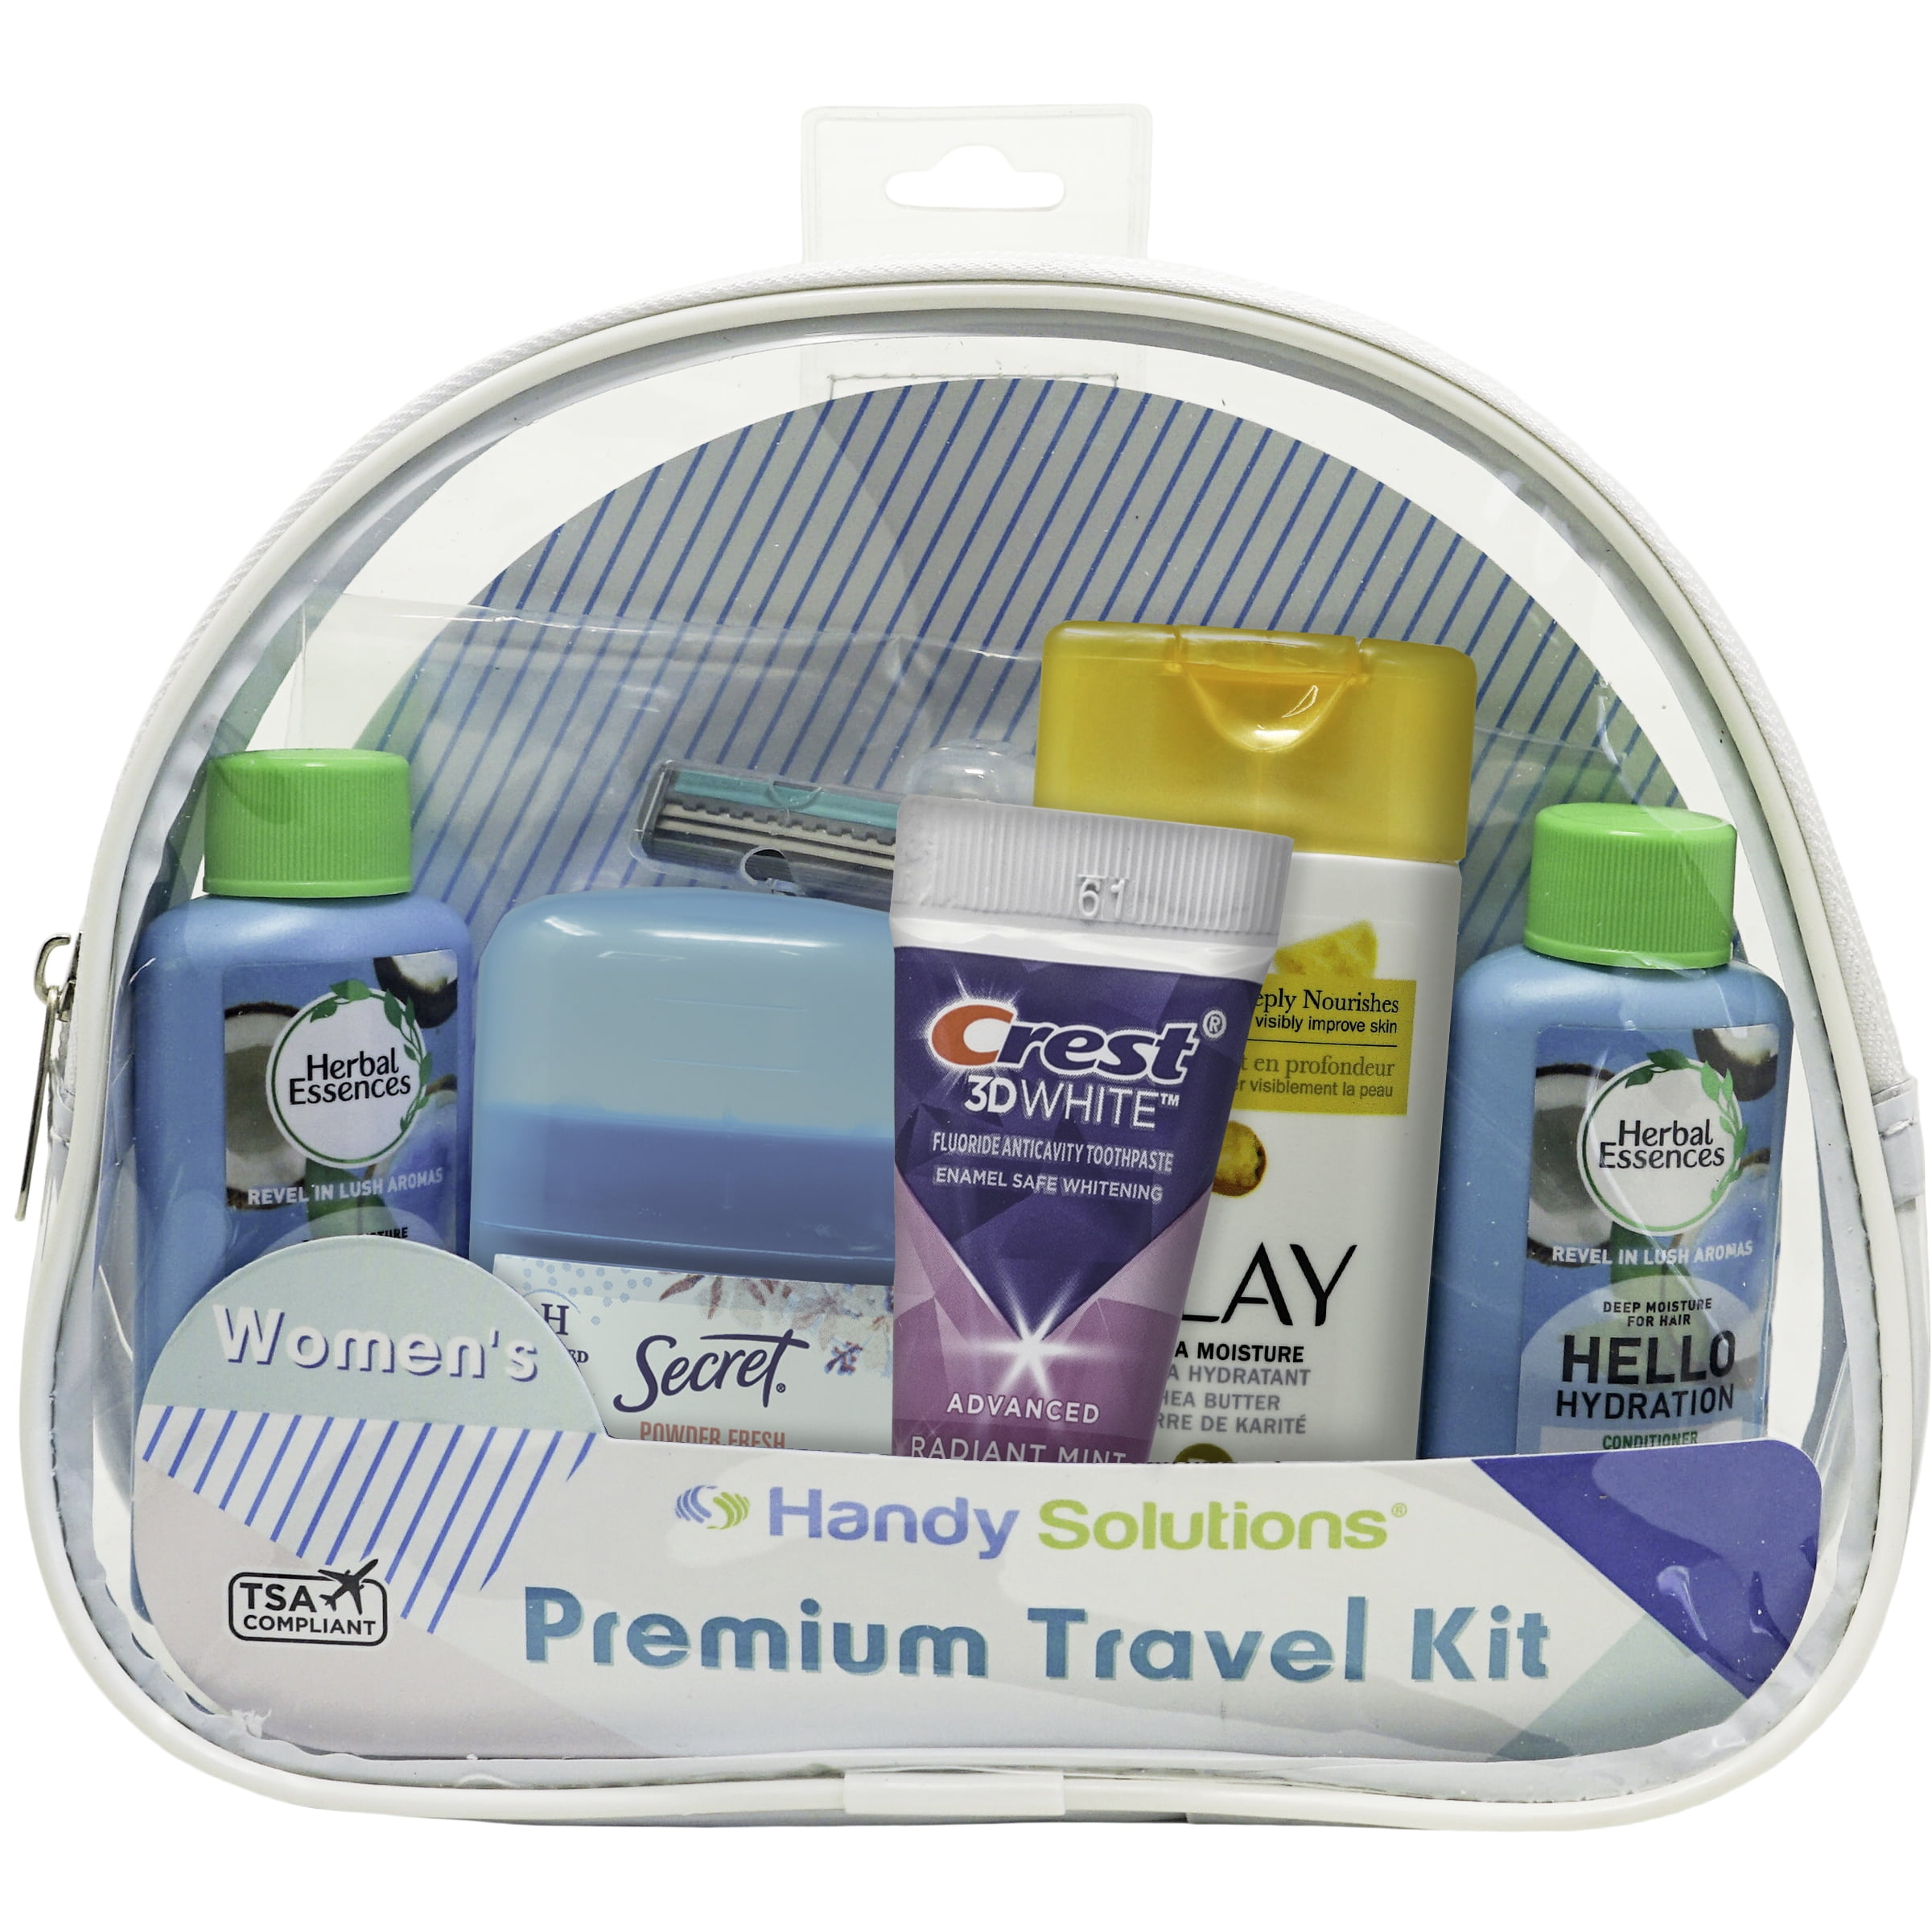 Bulk Travel Size Toiletries in New York Archives - B2B Online Shop in NYC